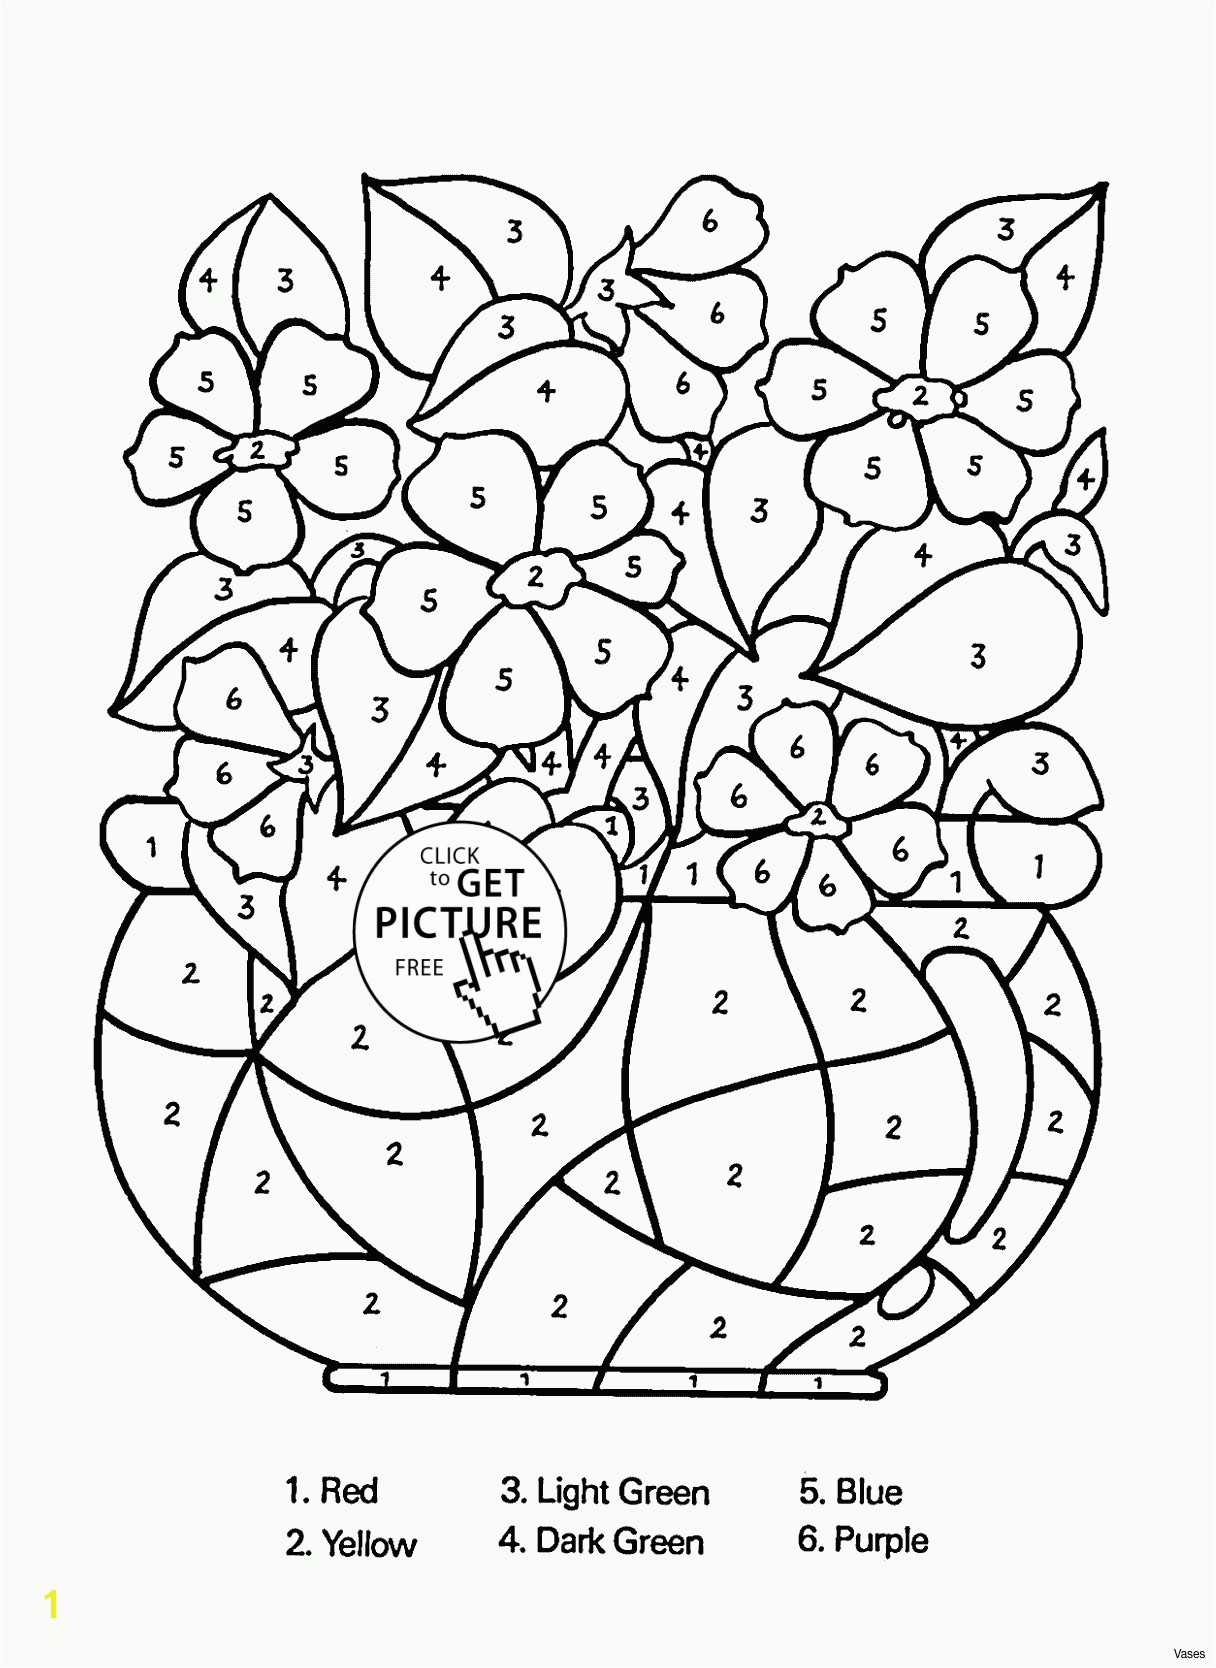 5 coloring sheet 4 h coloring pages